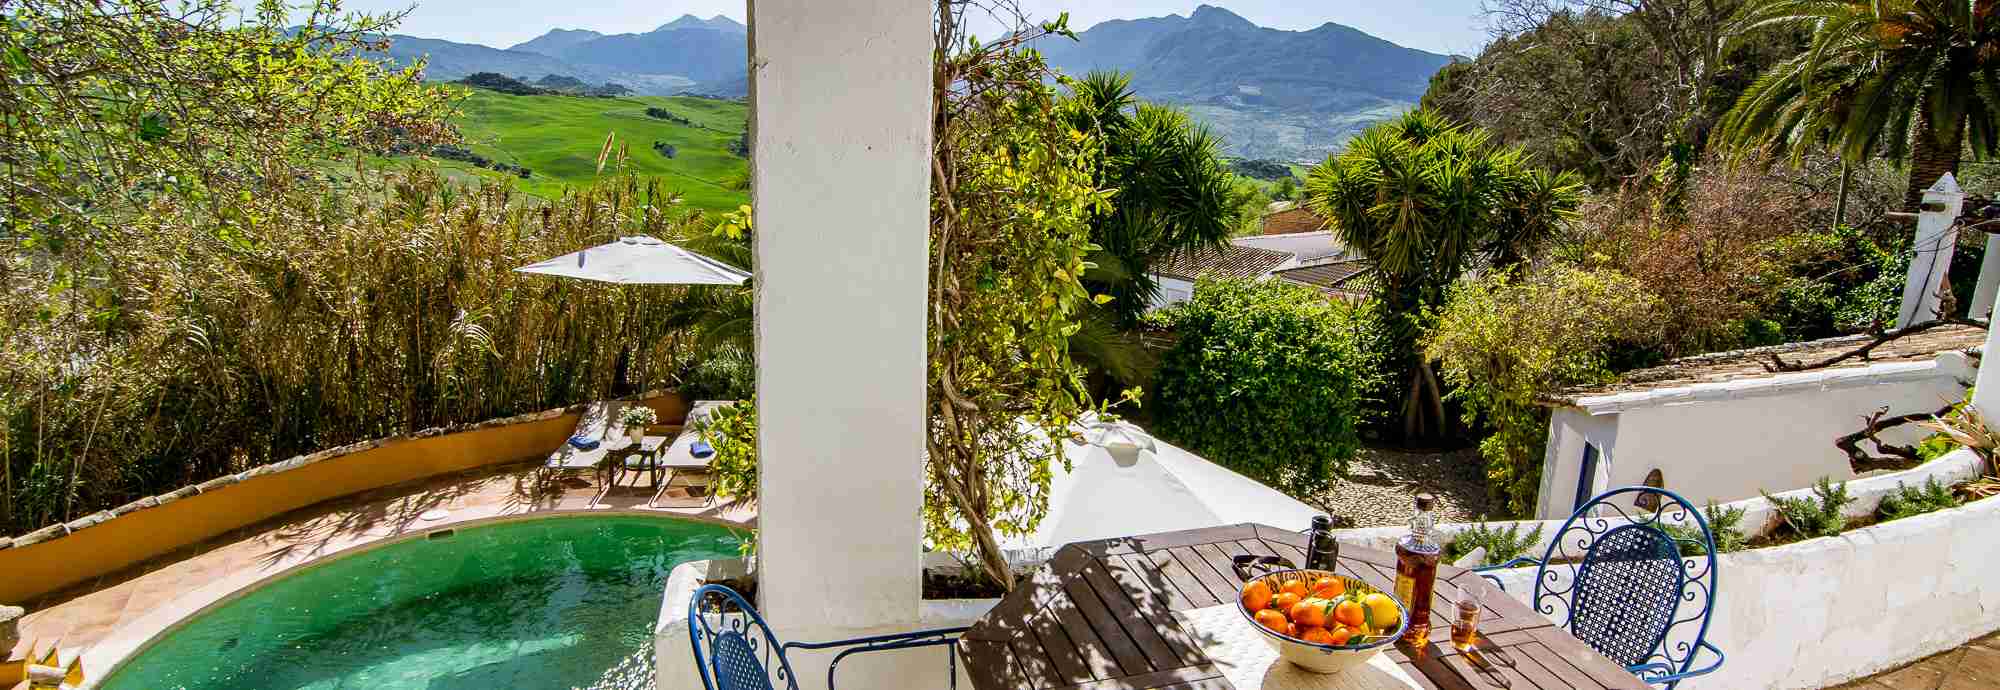 Delightful Ronda villa for that perfect rural holiday